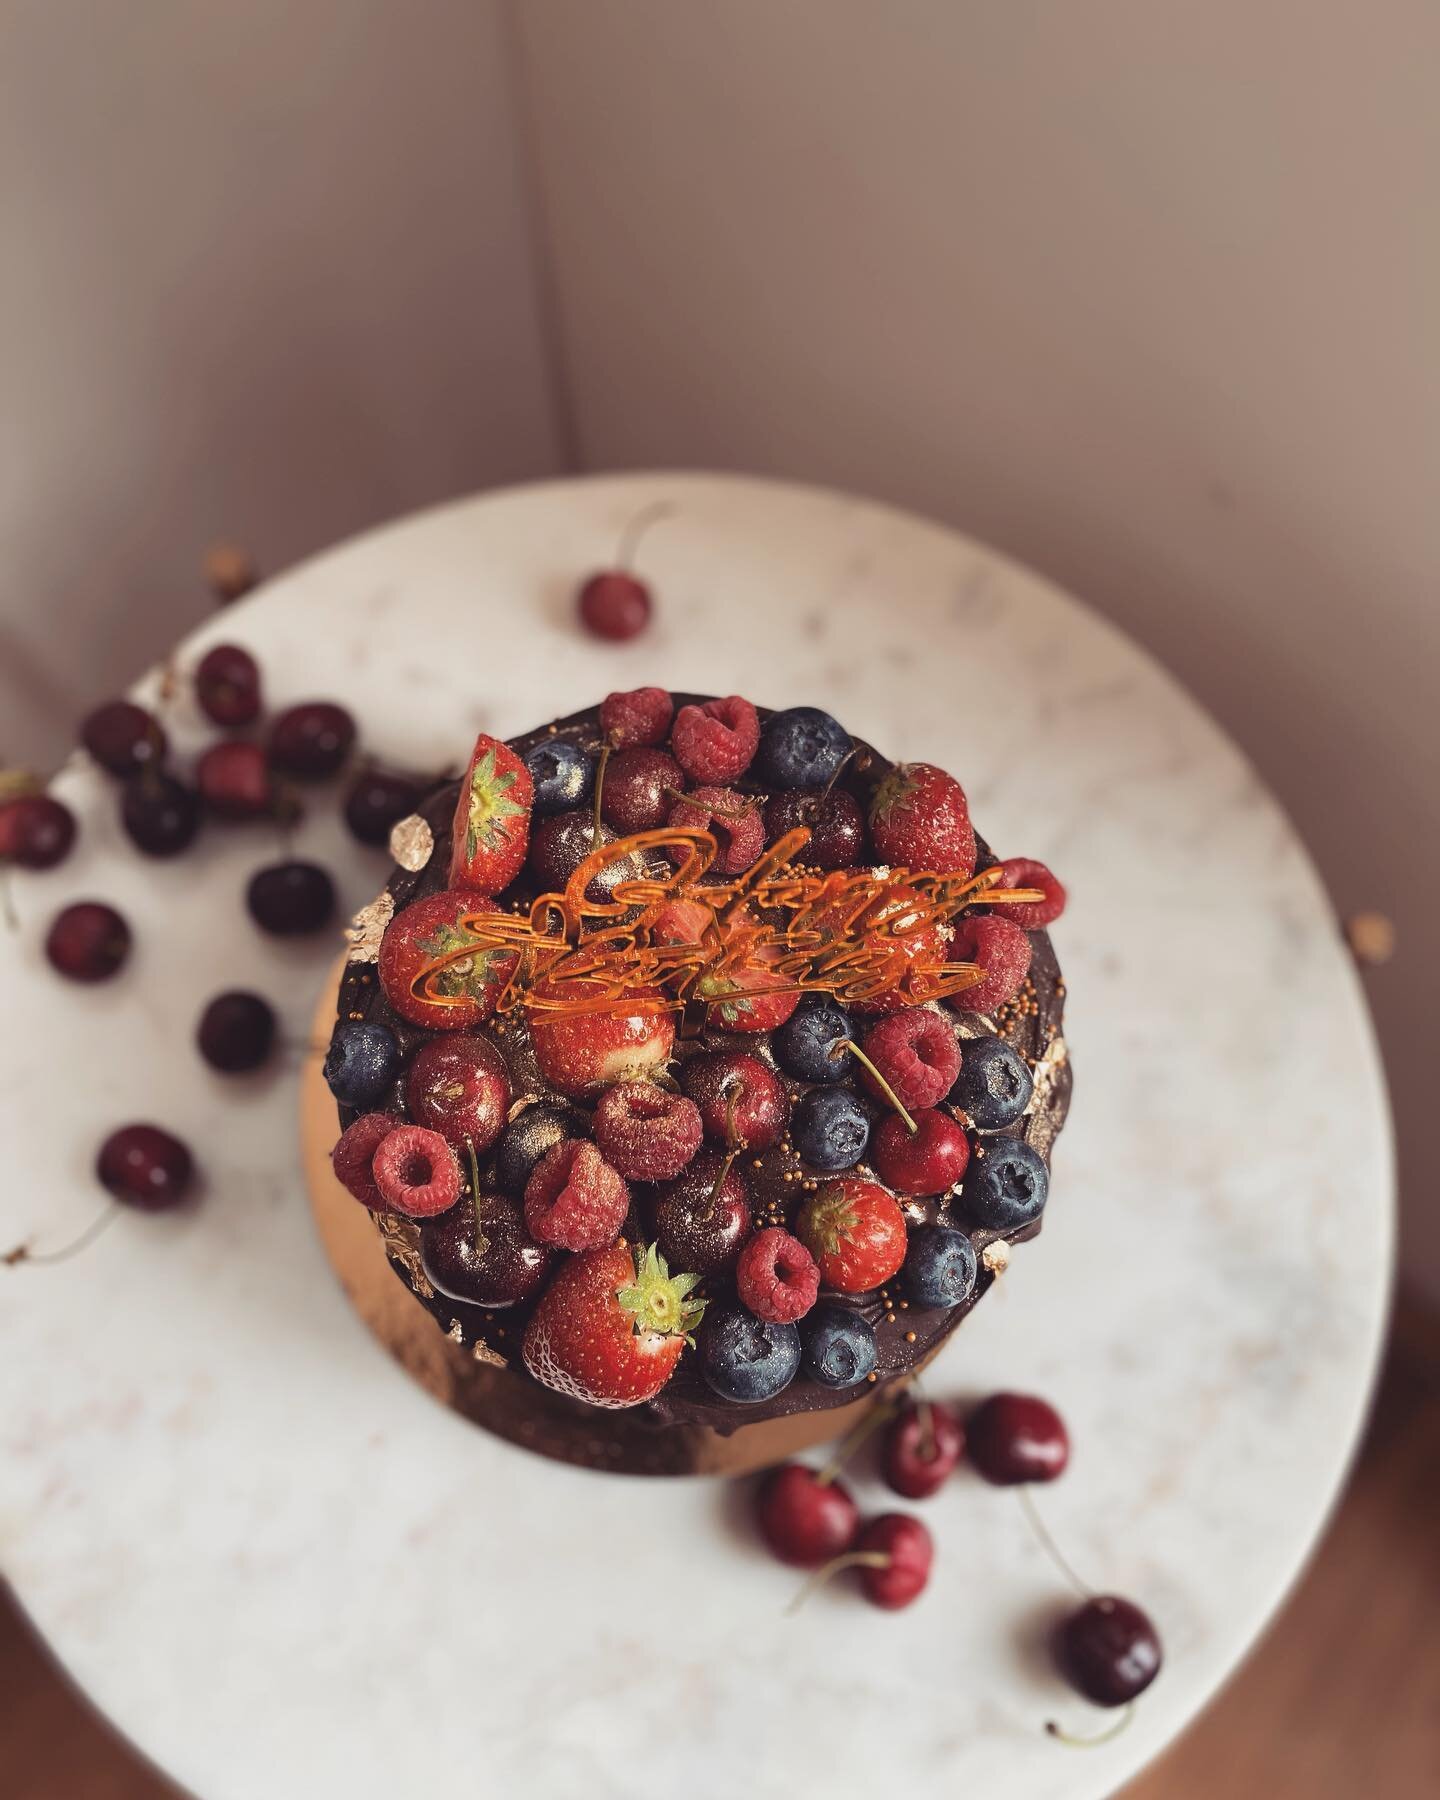 Summerfruits are back and ready to be used as much as possible! ☀️ This naked chocolate cake was filled with a dark chocolate ganache and lots of berries🫐🍓